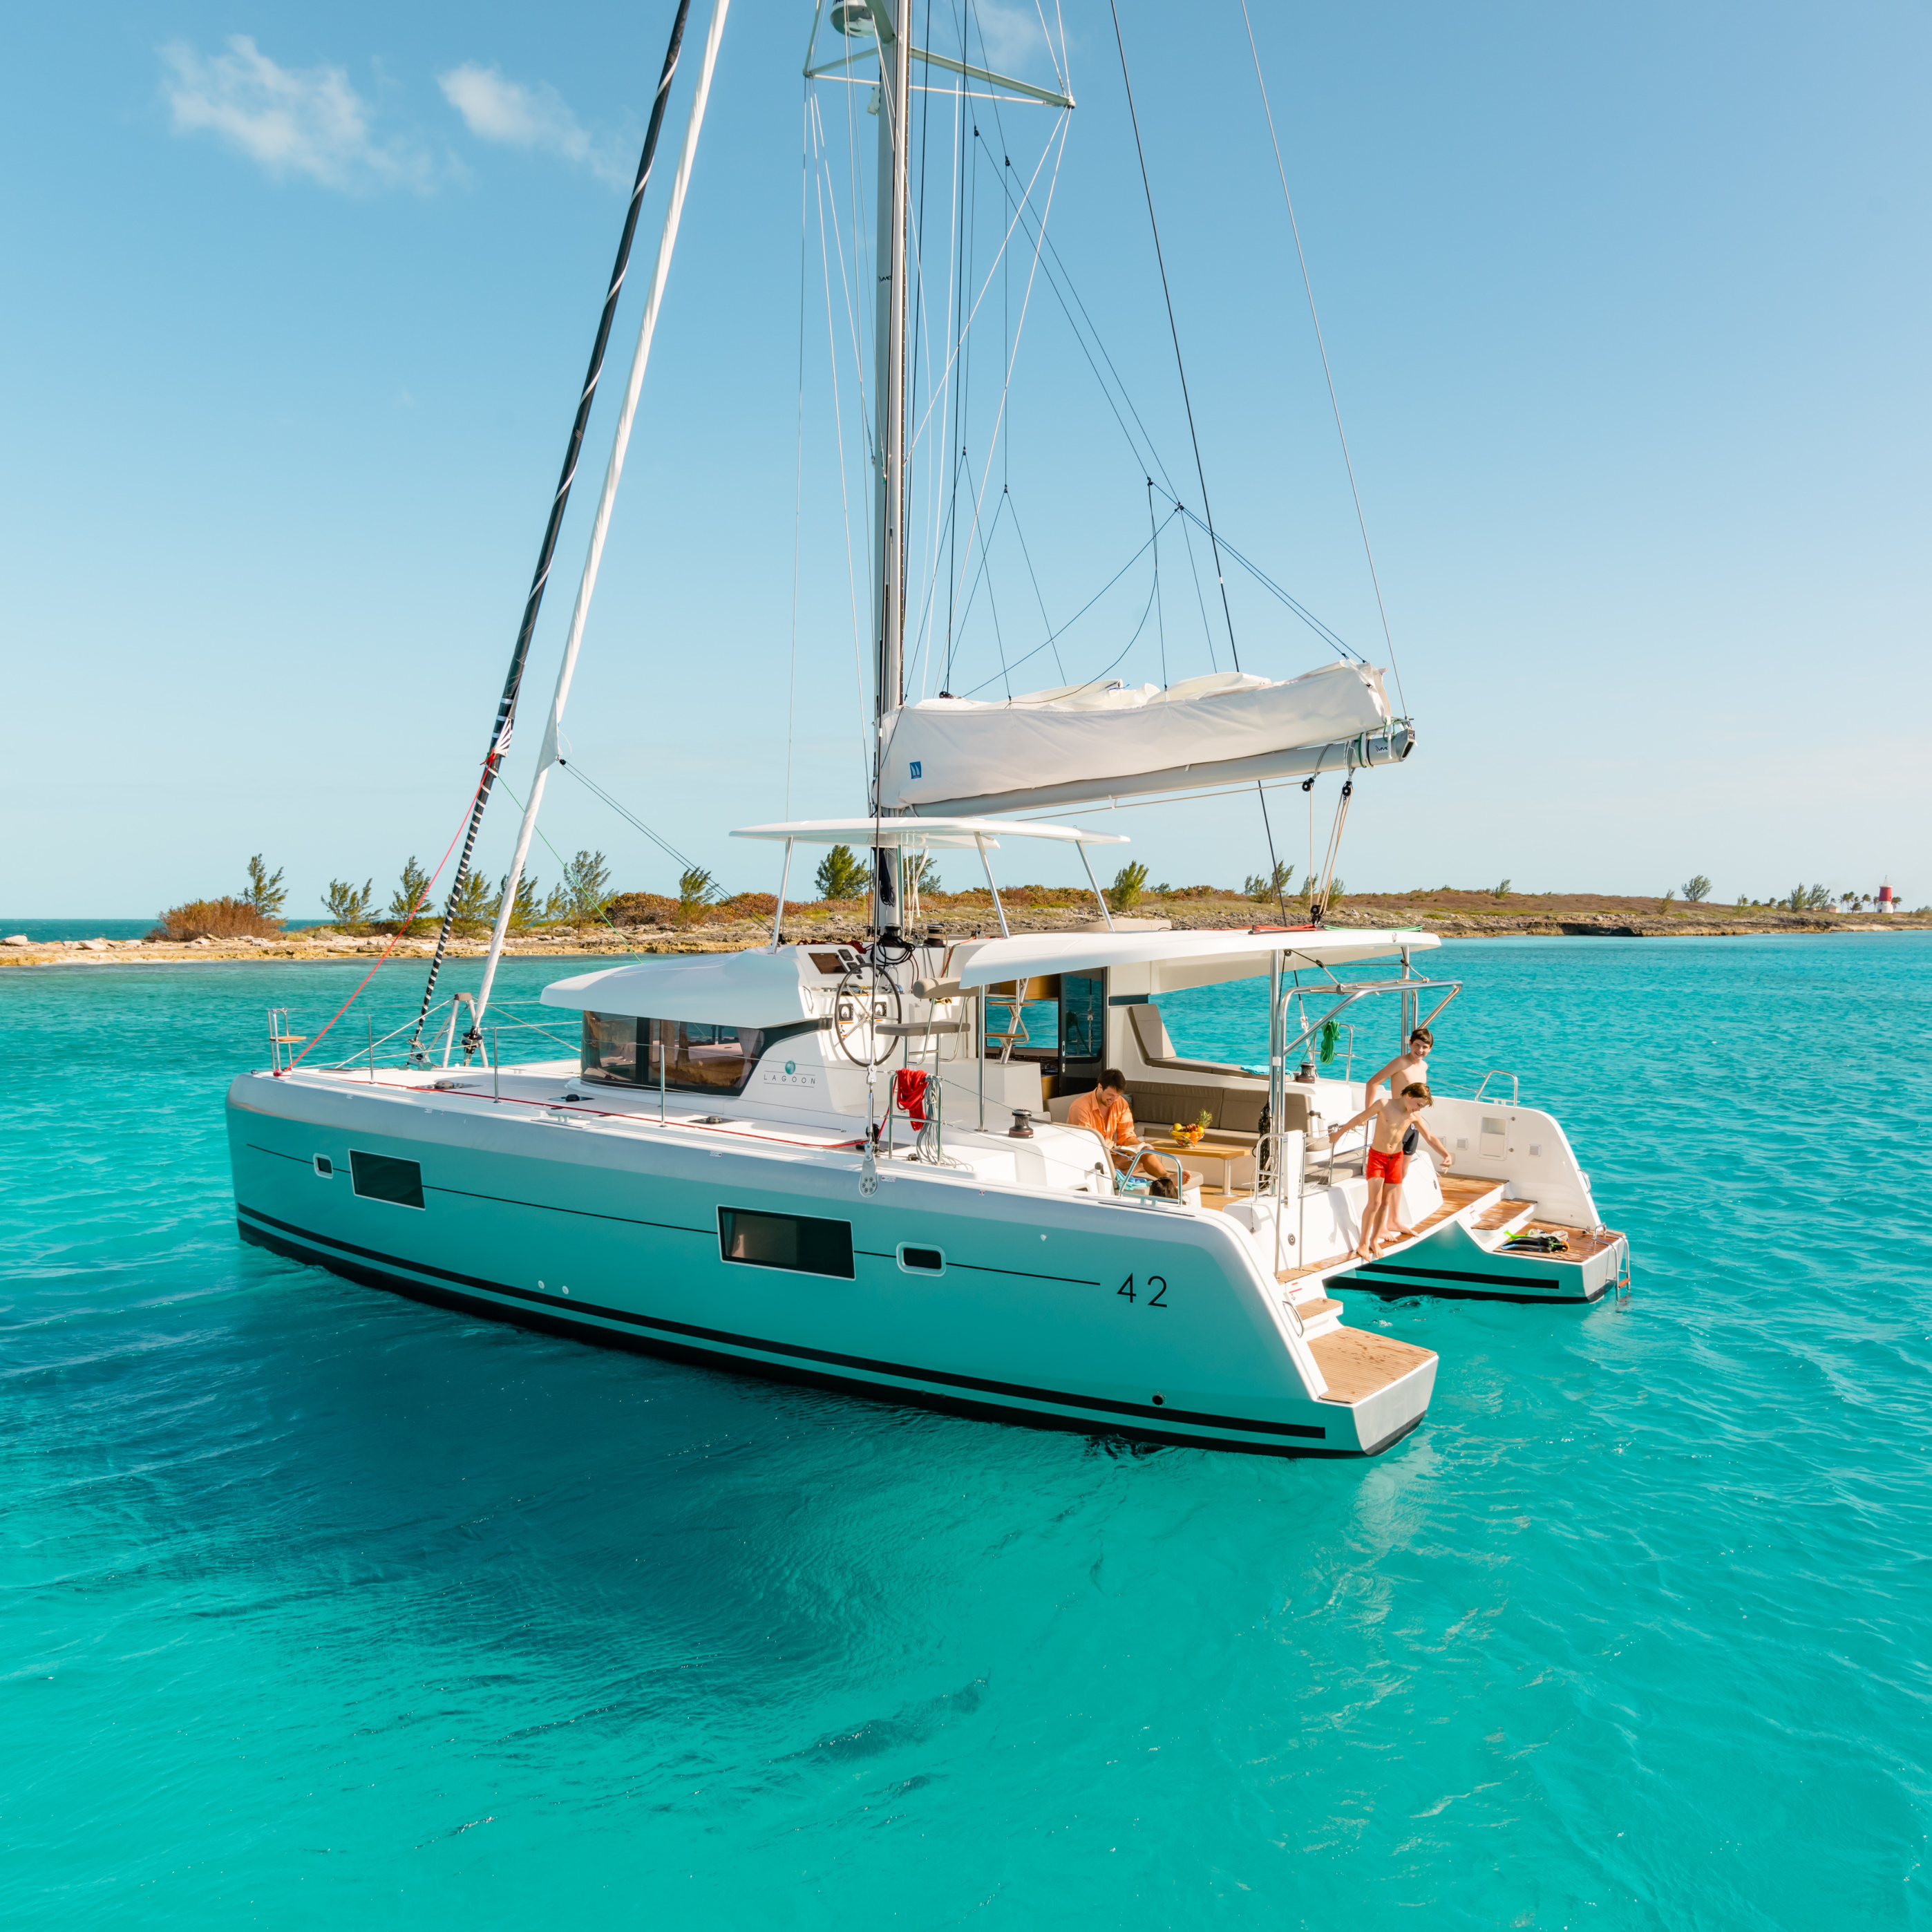 Rare Opportunity With Lagoon Cats Charter Yachts Australia